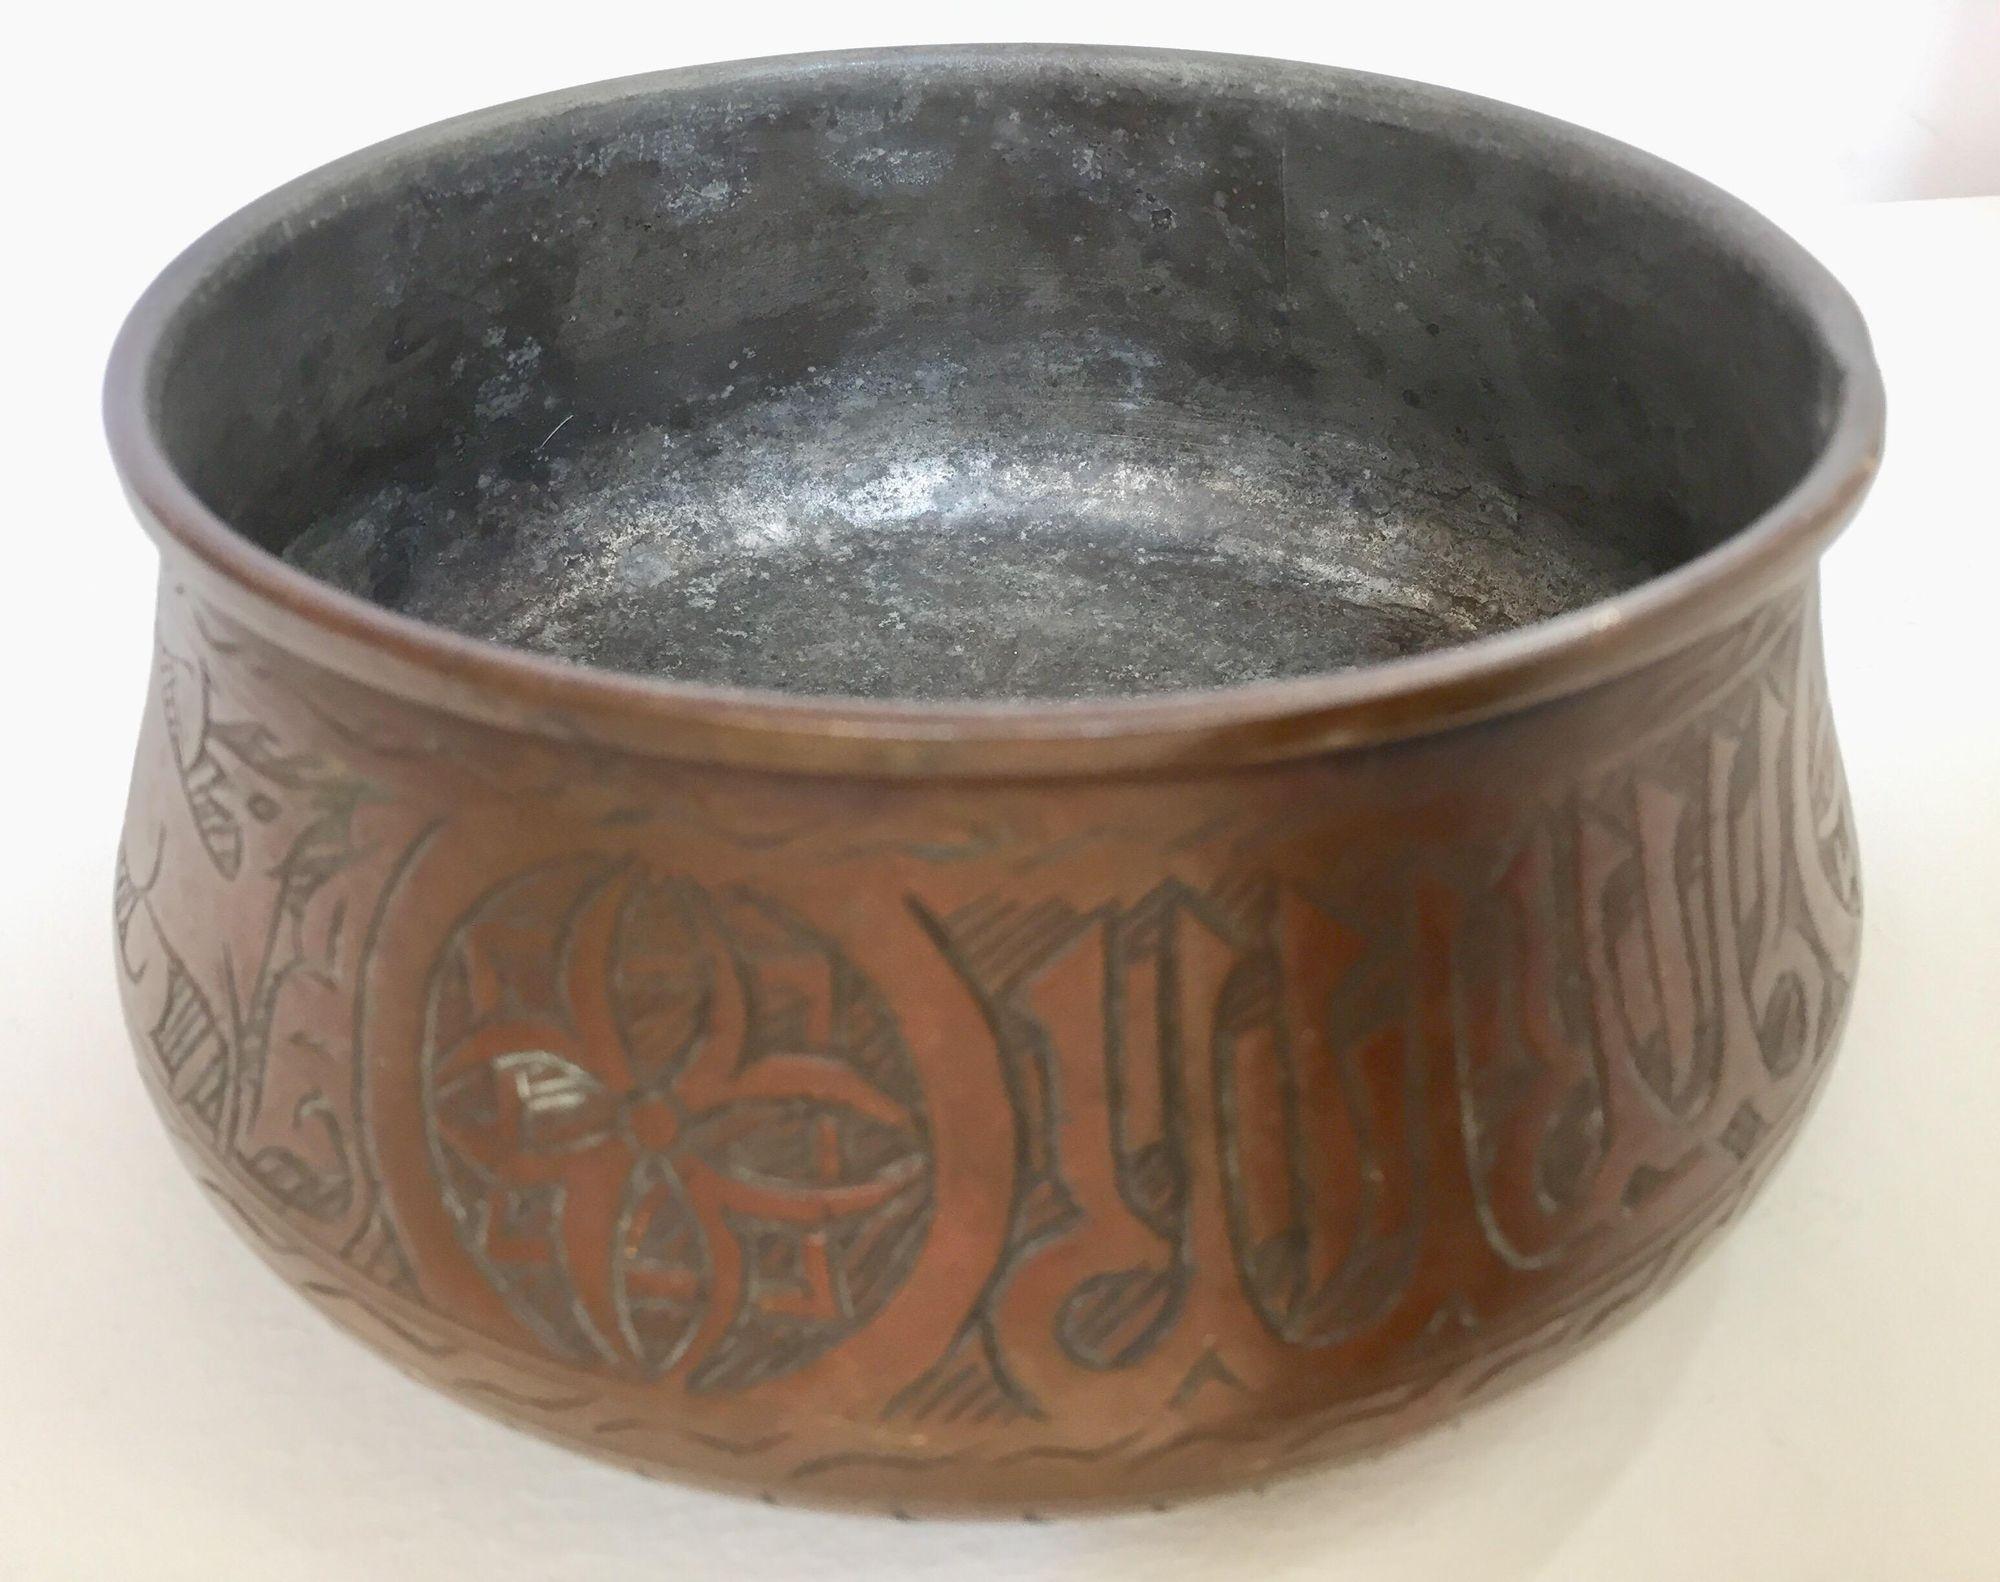 Middle Eastern Egyptian Islamic tinned copper bowl etched and hand carved. 19th century Islamic tinned cooper bowl hand-etched with Kufic Islamic writing, floral and geometric Moorish designs. Measures: Diameter 6